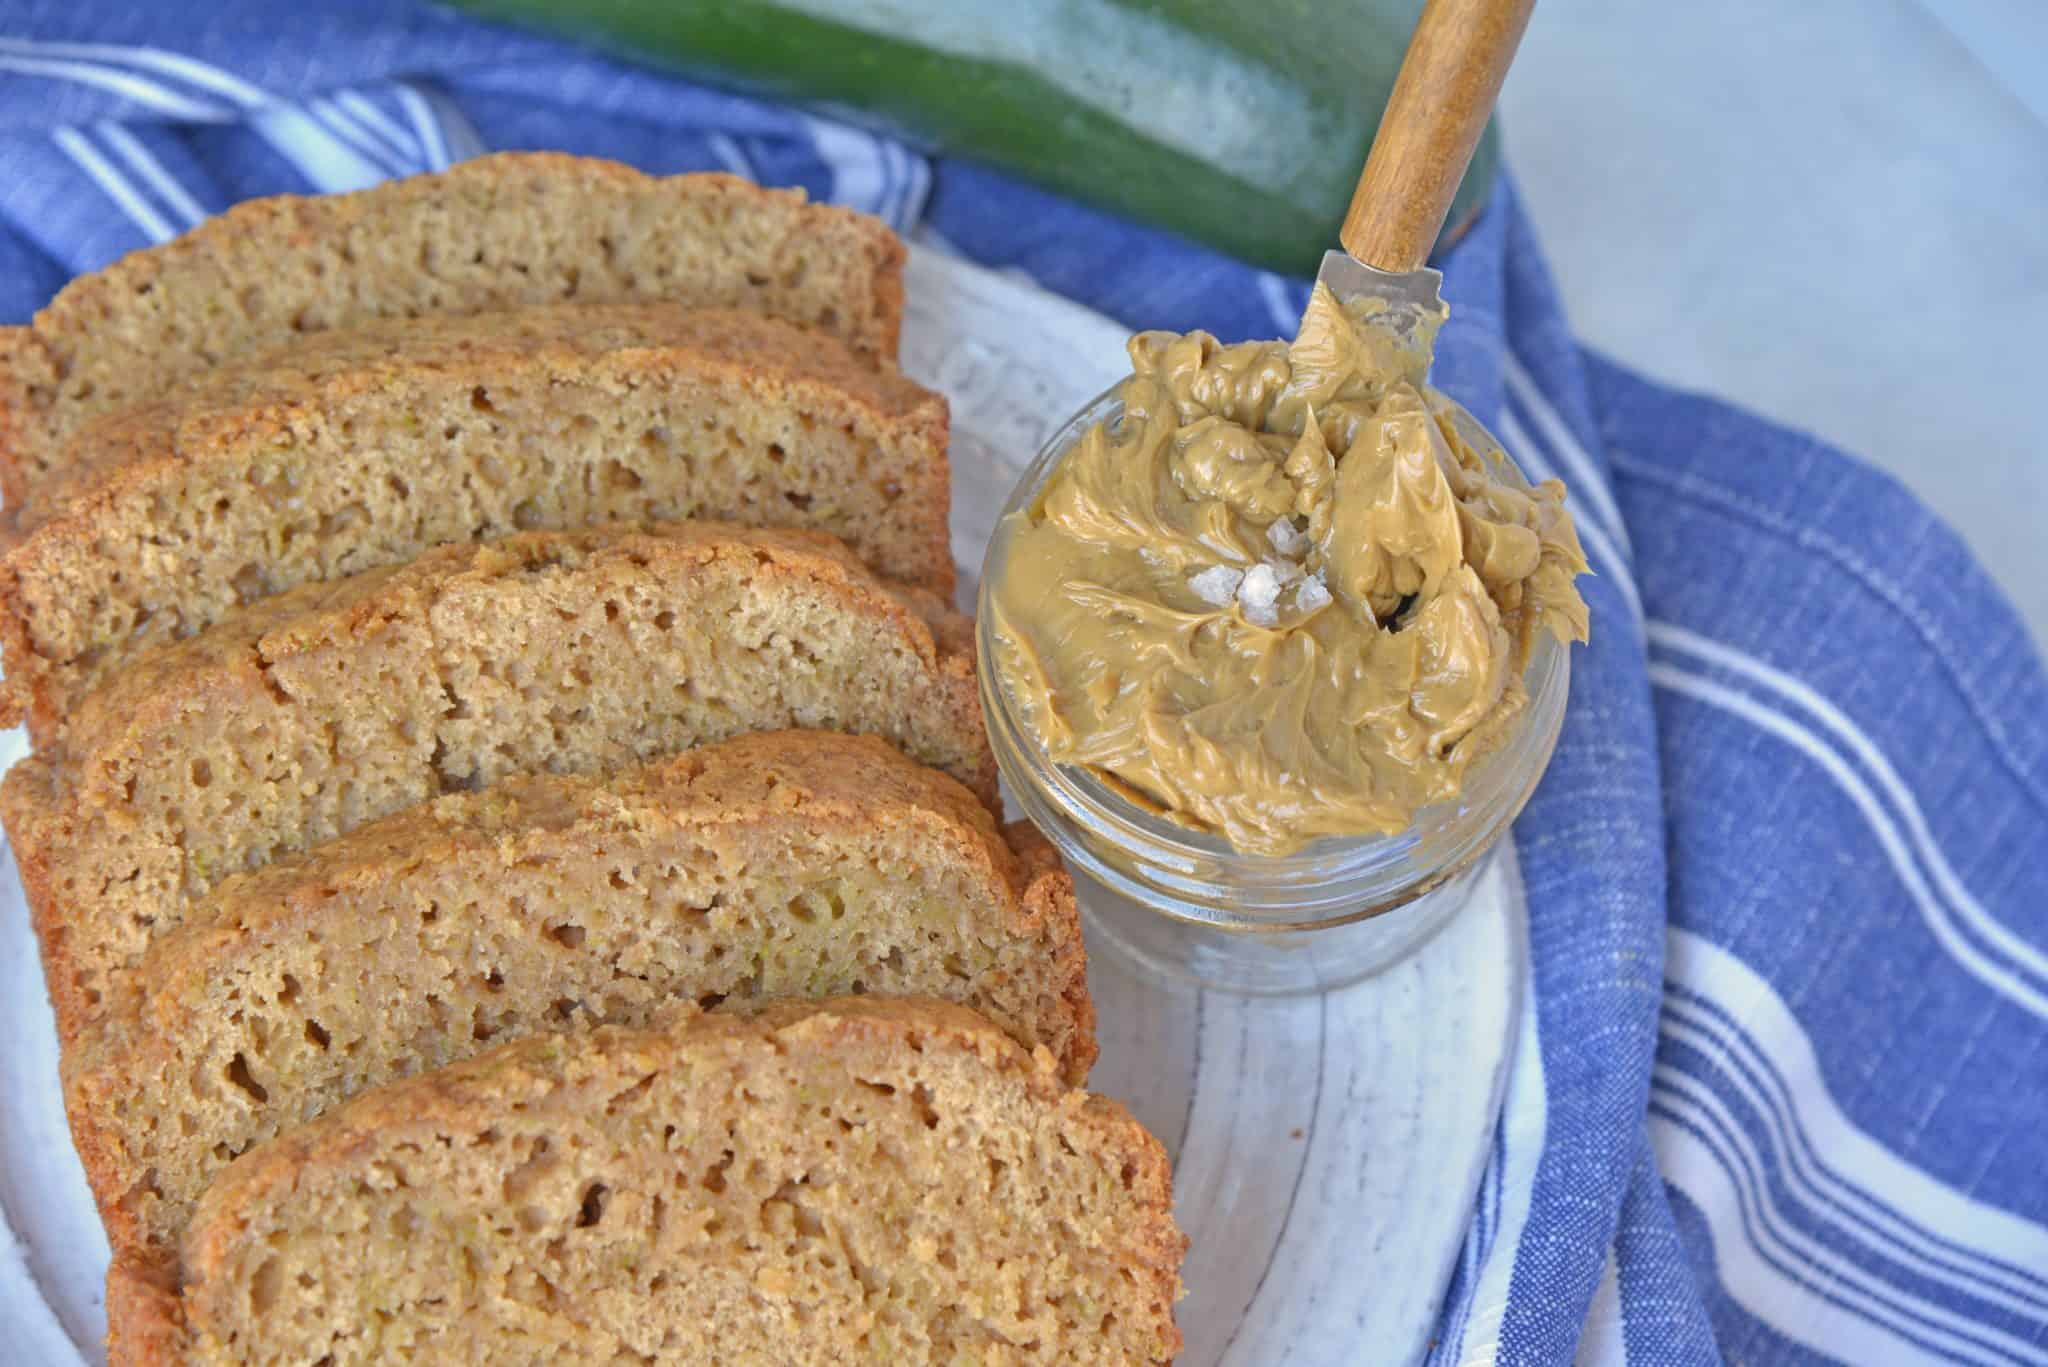 Best Zucchini Bread is the most moist zucchini bread recipe made by a pastry chef. One of the best zucchini recipes ever! Serve with zingy molasses butter. #bestzucchinibread #zucchinirecipes www.savoryexperiments.com 